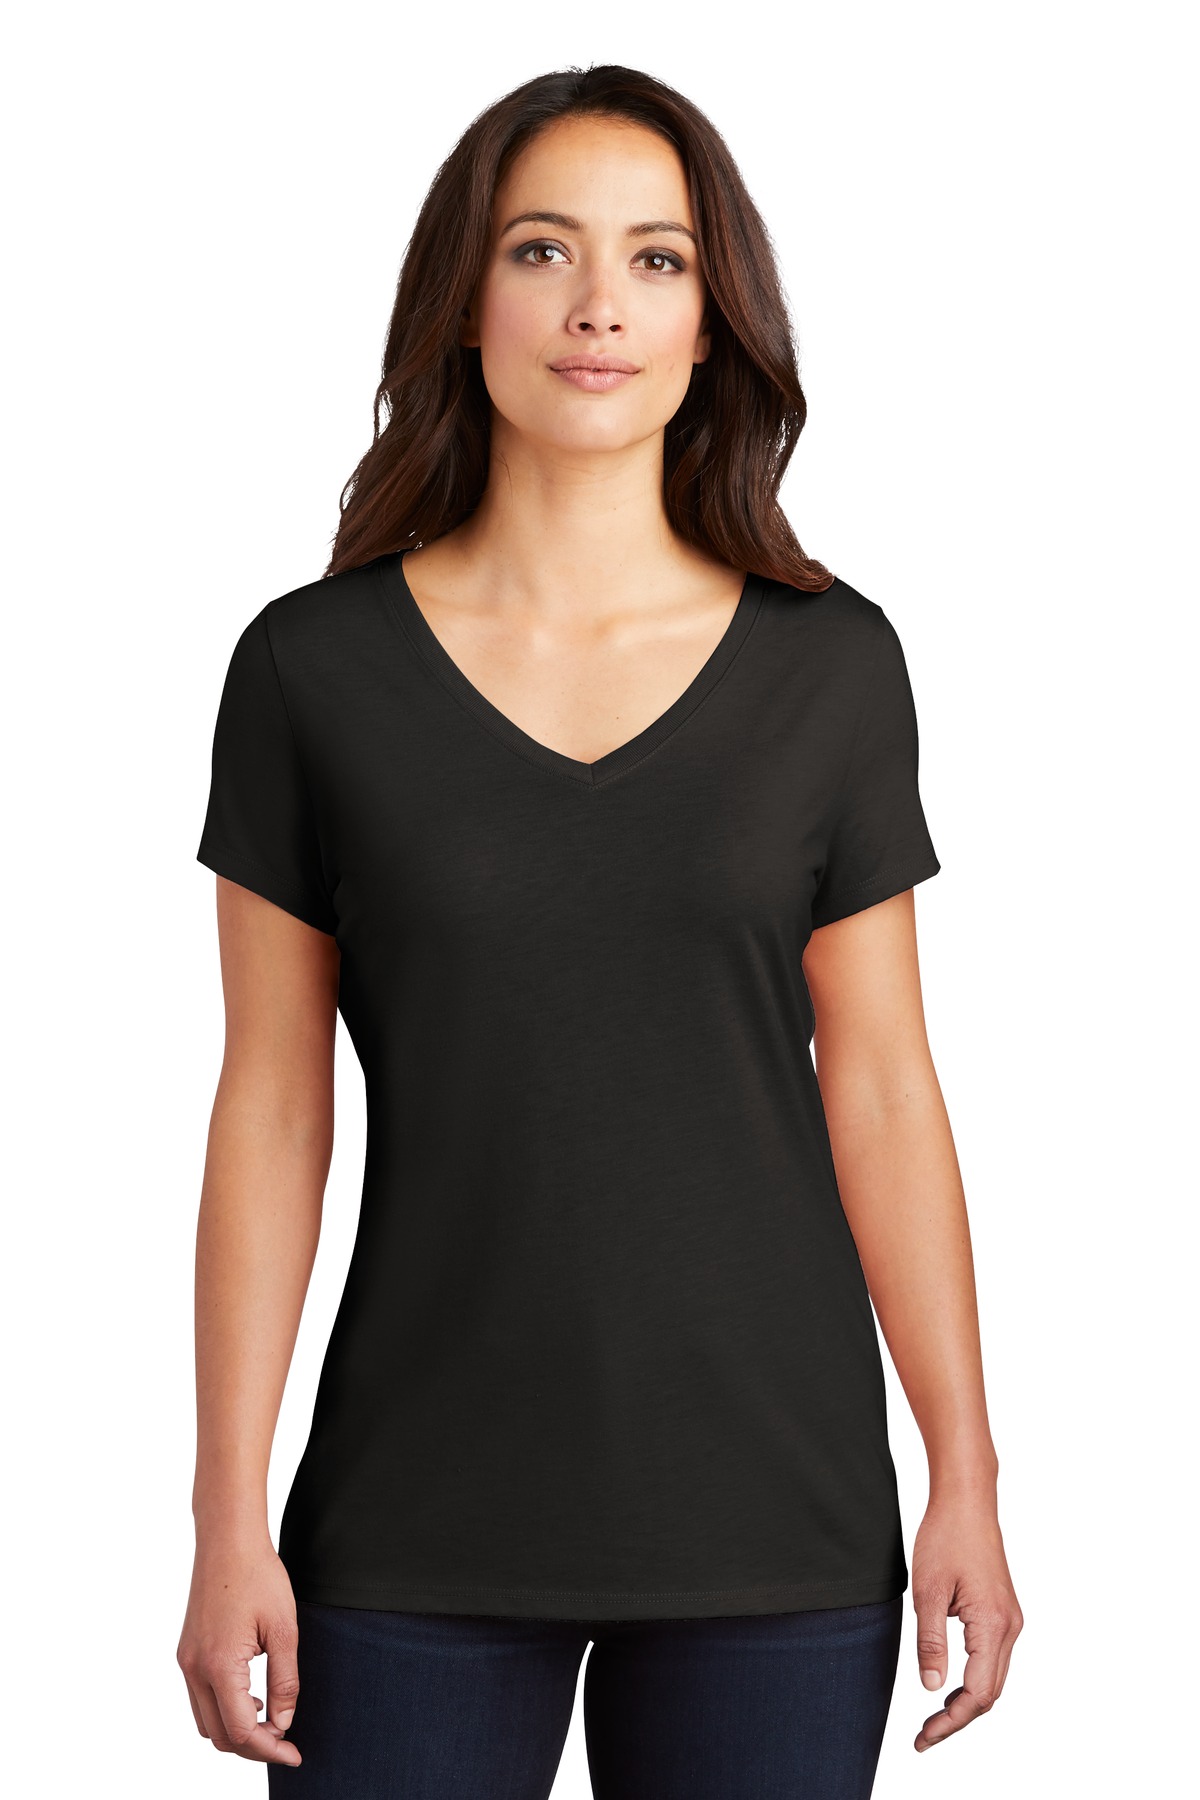 District ® Women's Perfect Tri ® V-Neck Tee